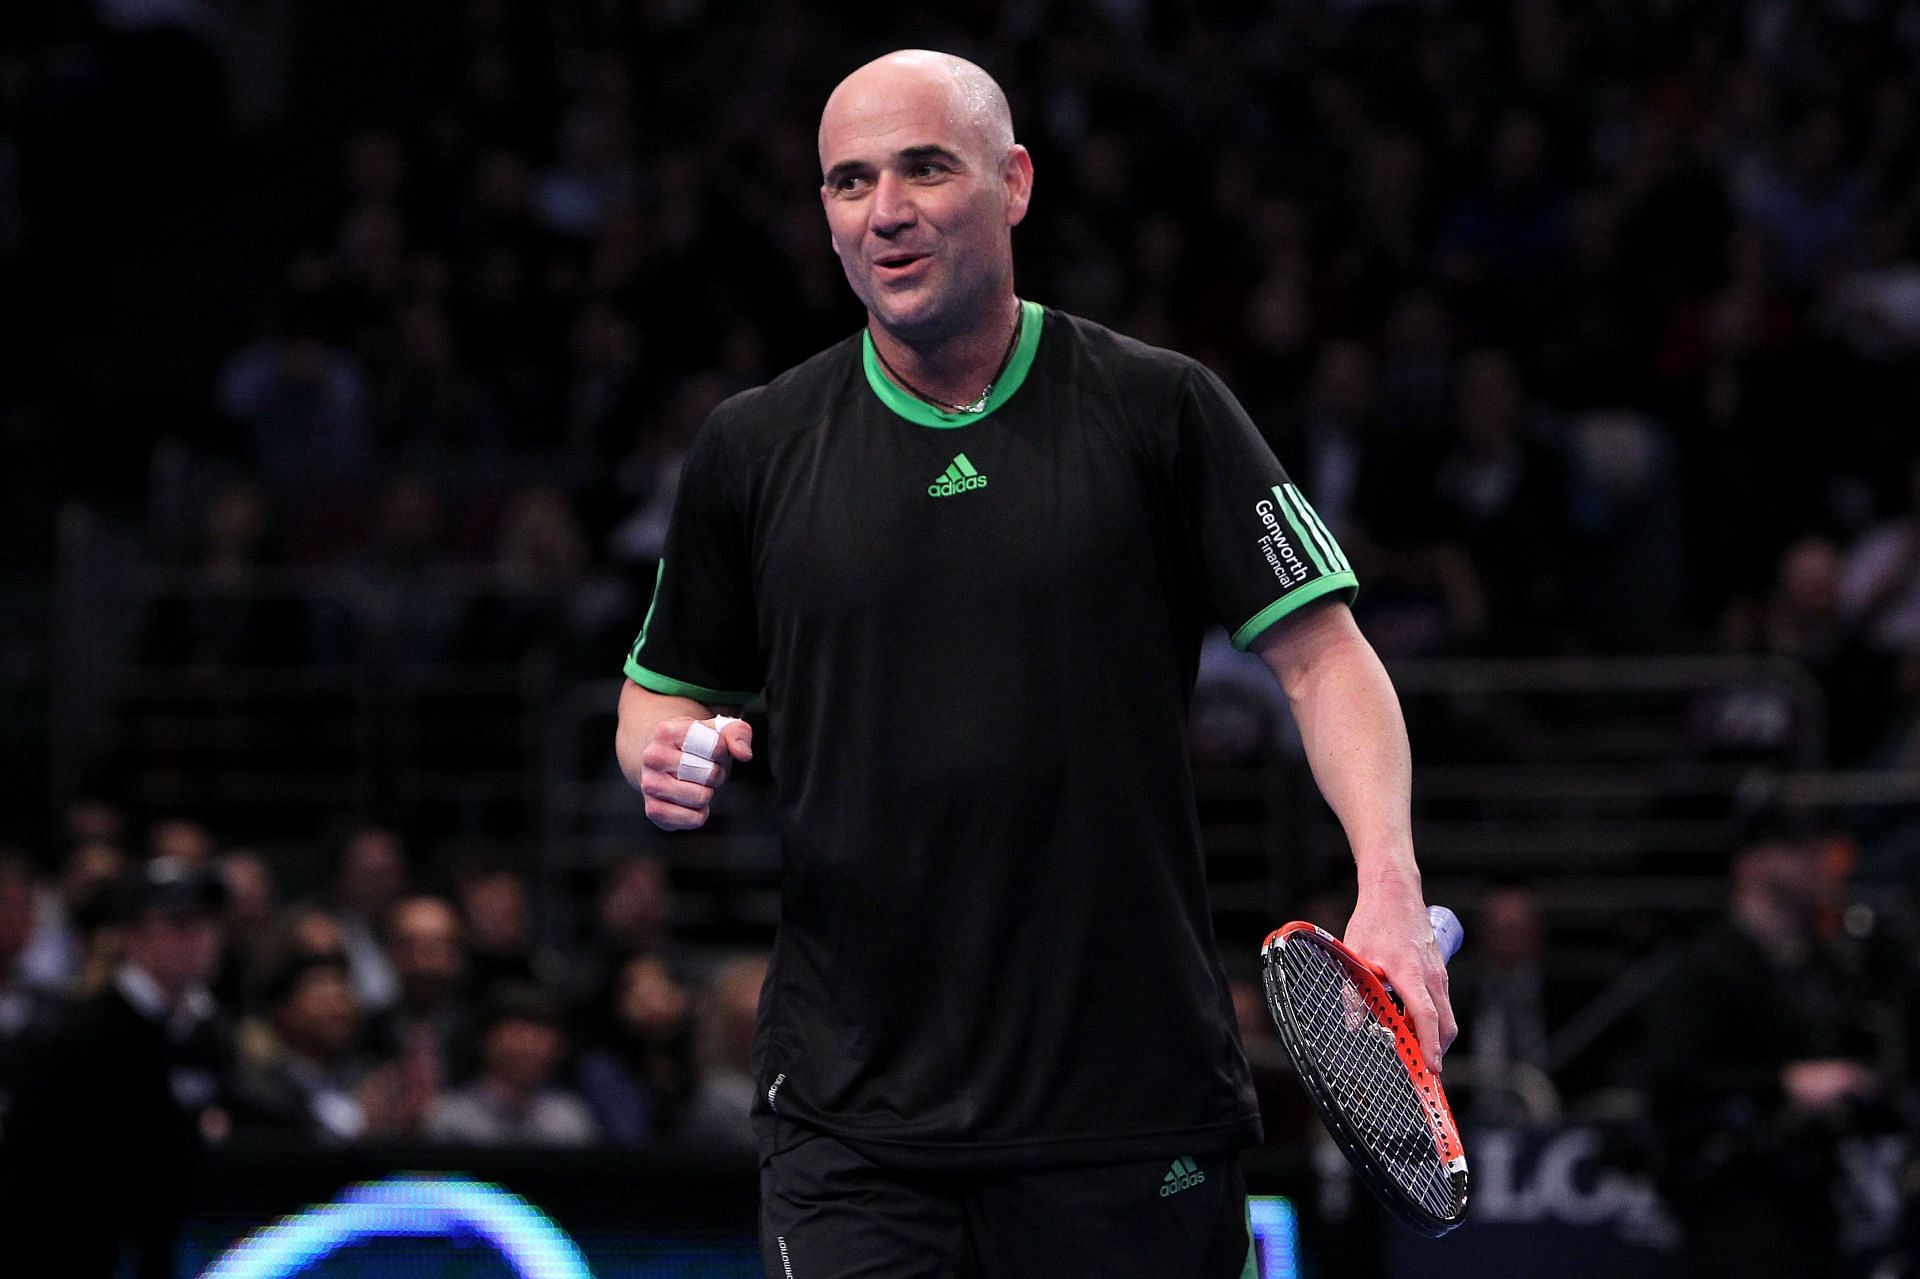 Agassi held the record for most titles in this competition at one point in time.